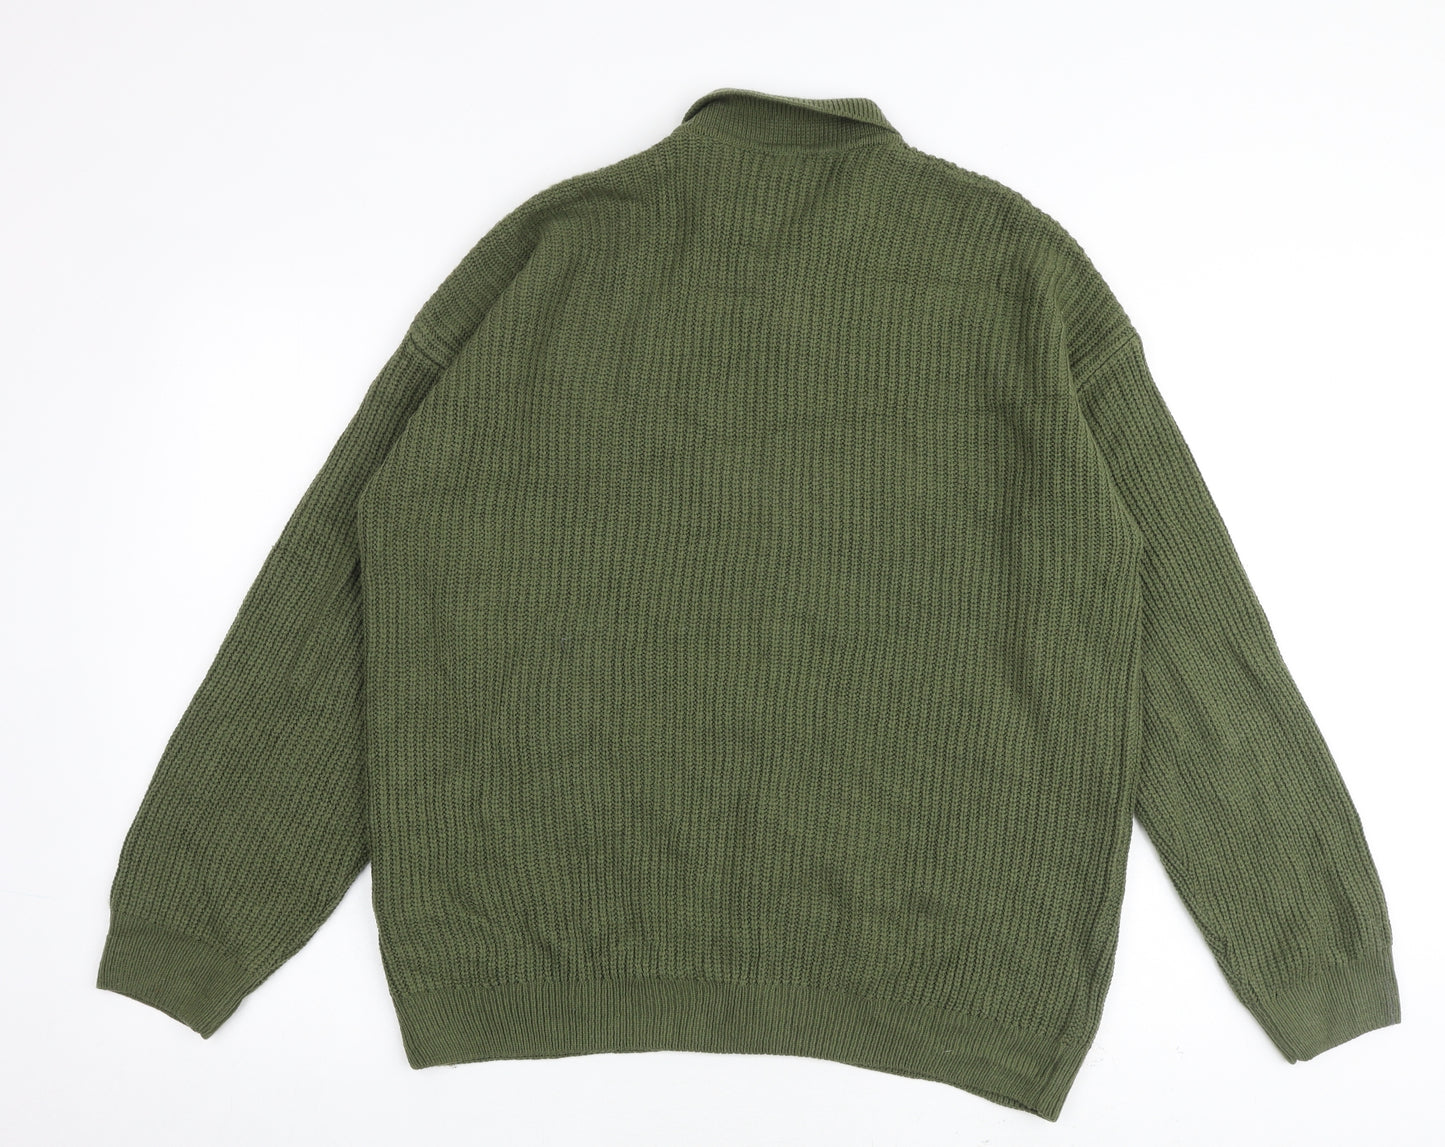 New Look Mens Green Collared Acrylic Cardigan Jumper Size L Long Sleeve